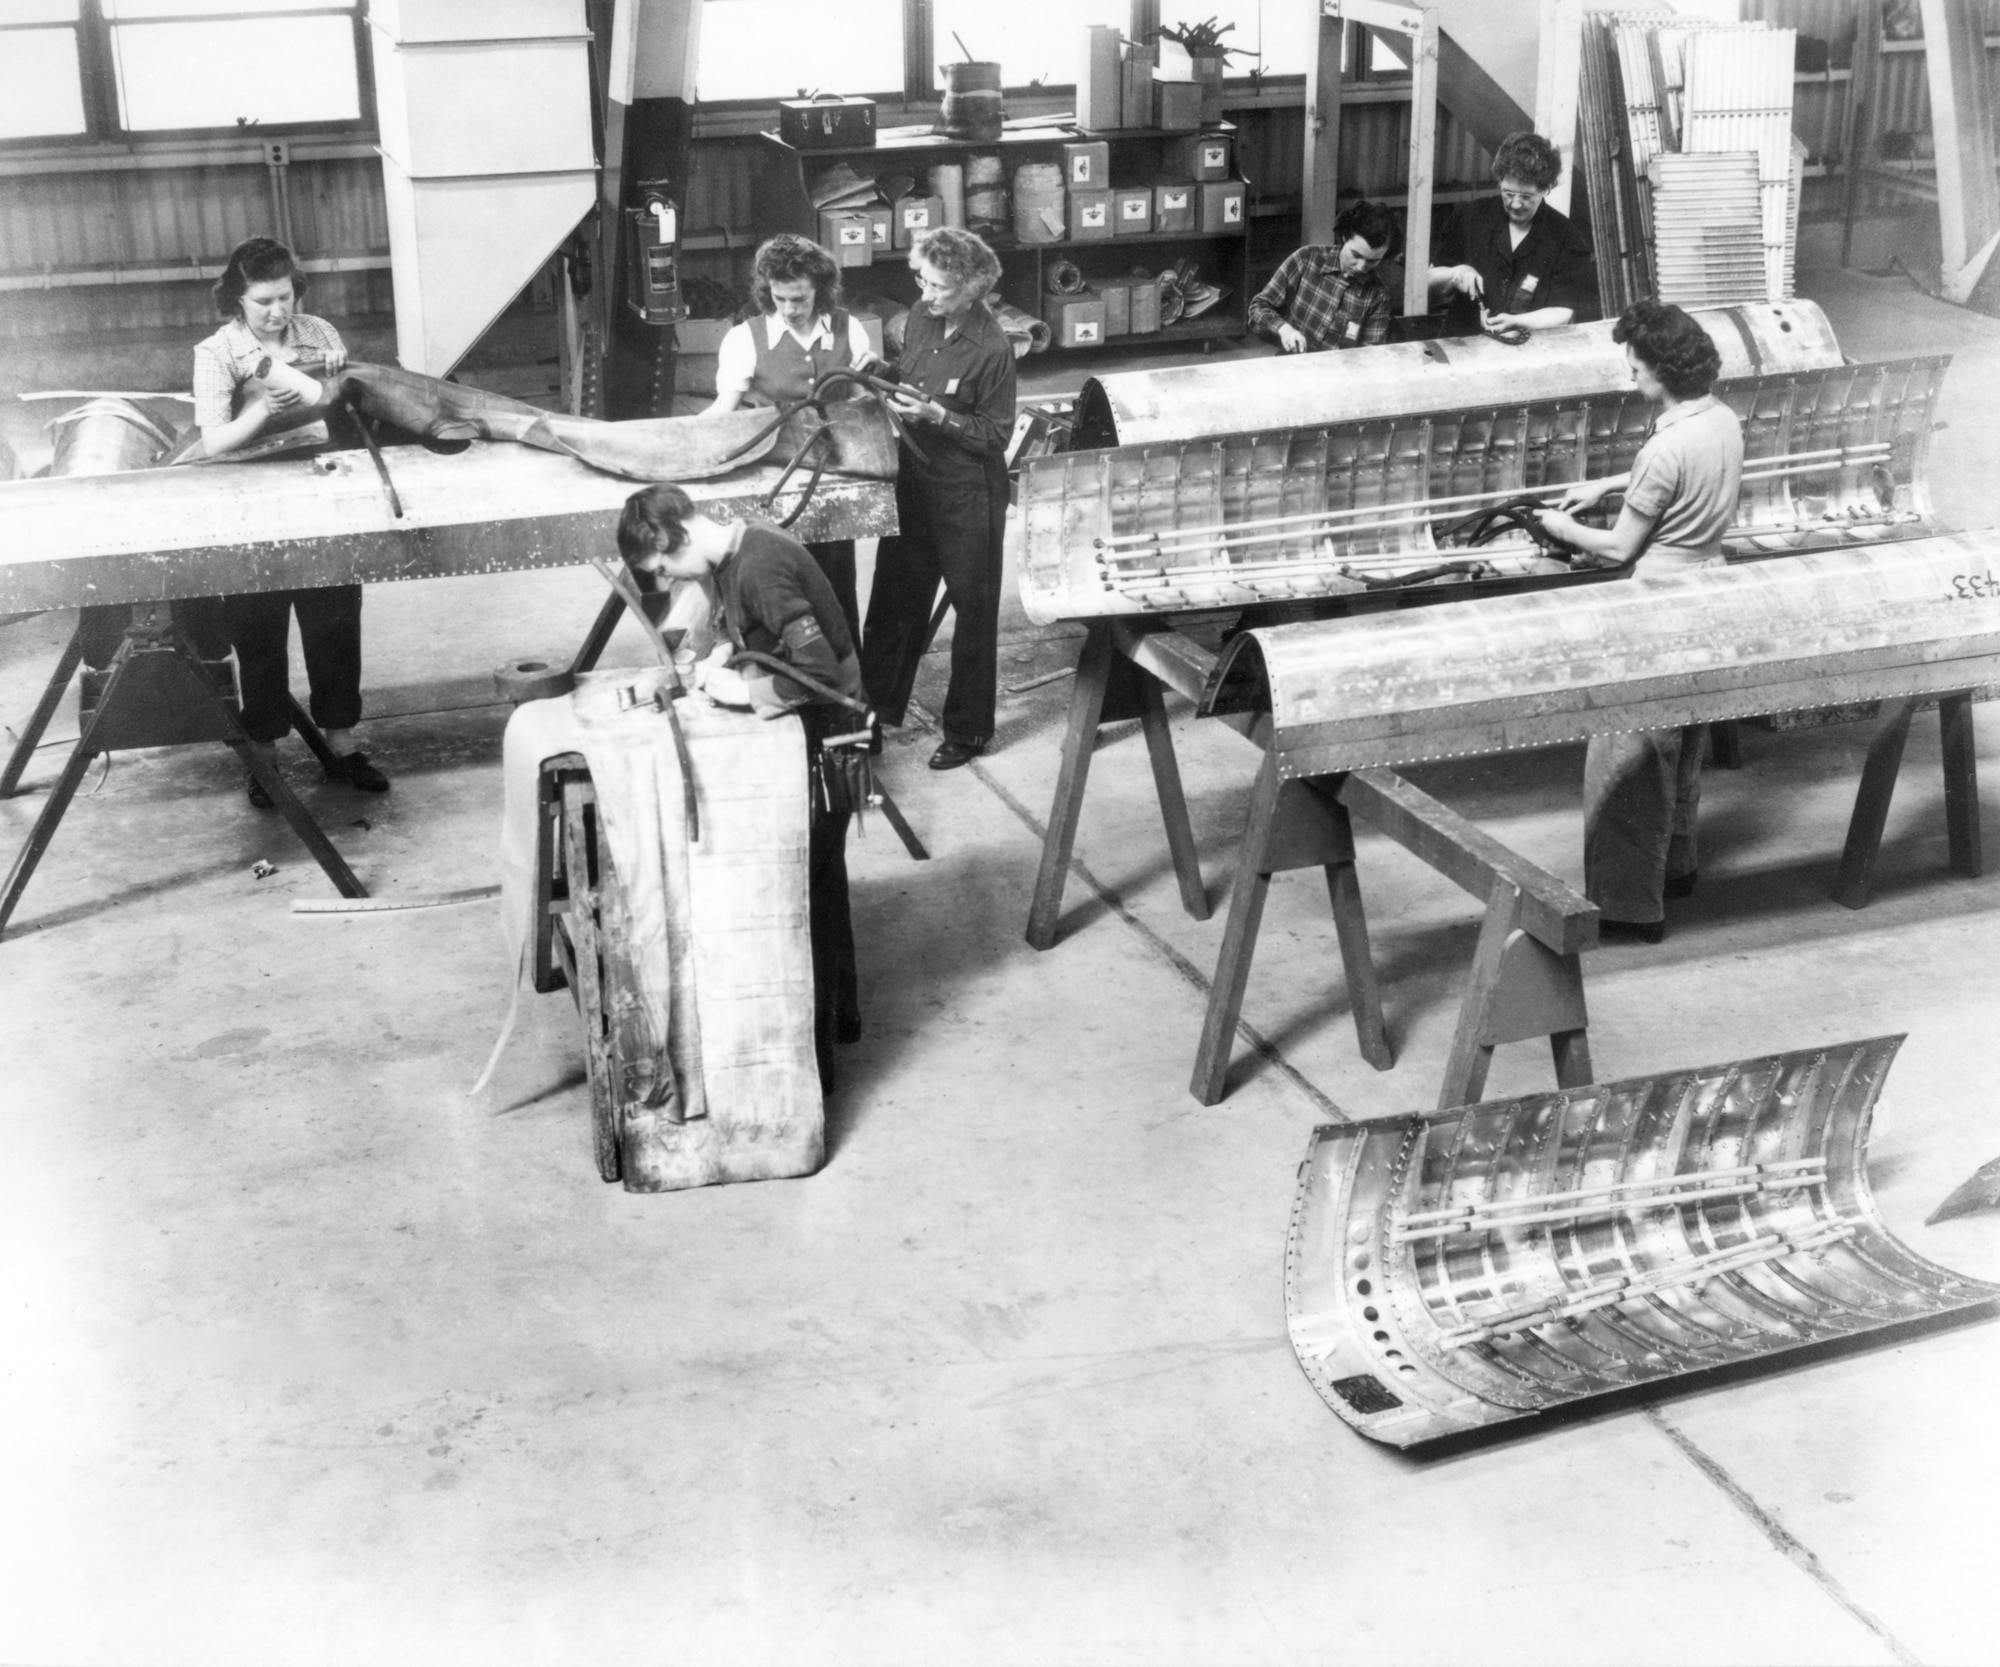 Women working on aircraft panels at Hill AFB during World War II.